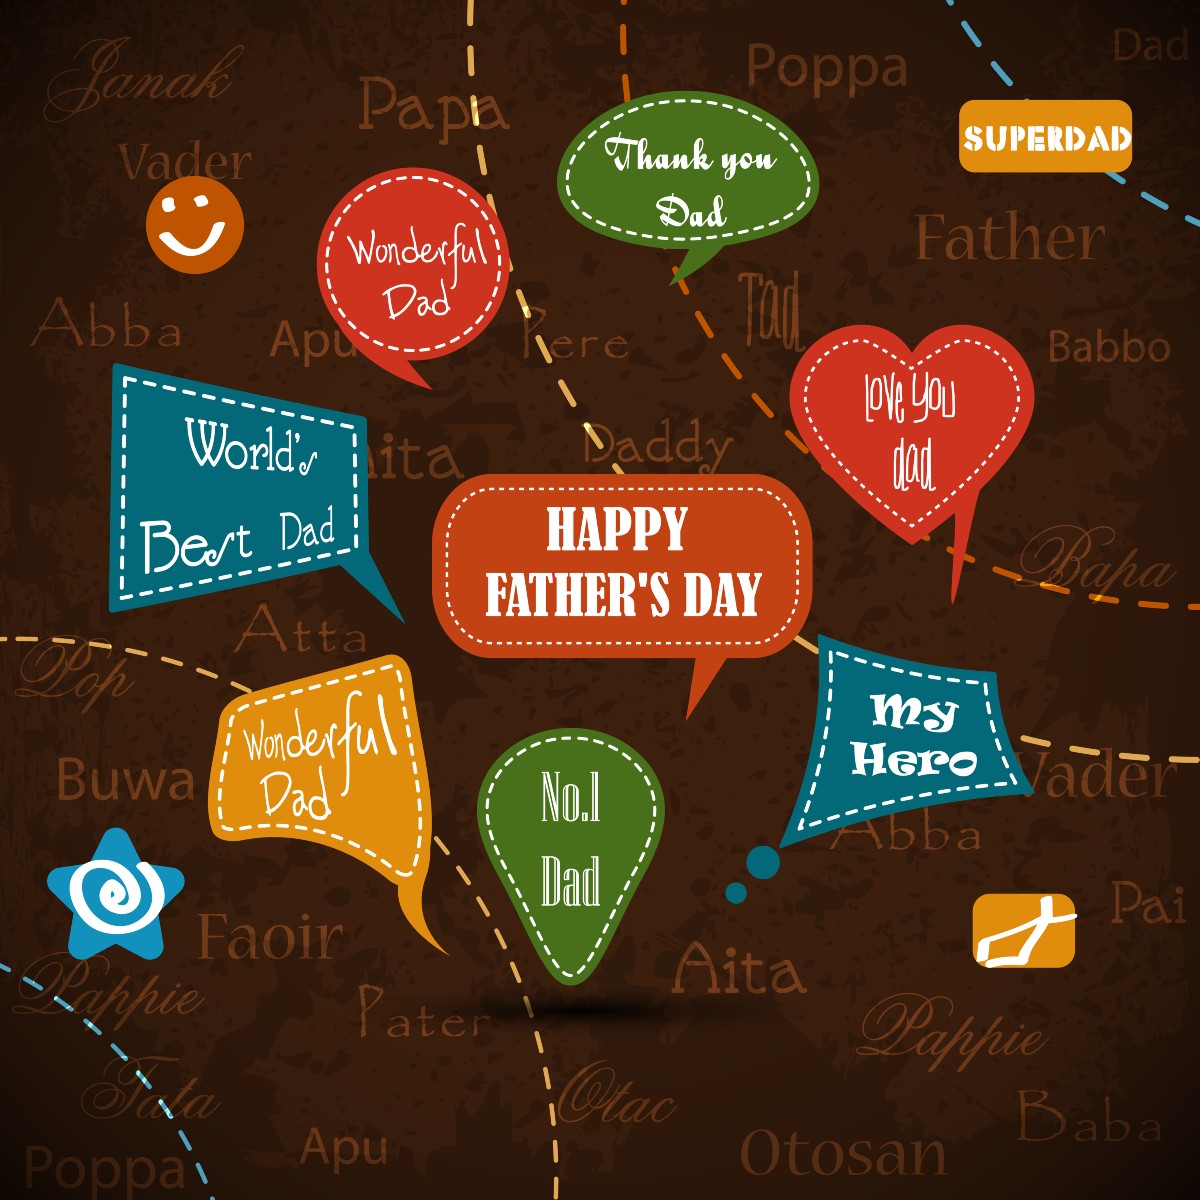 Happy Father’s Day 2022: Wishes Images, Quotes, Photos, Pics, Facebook SMS and Messages to share with your loved ones. (Image: Shutterstock) 